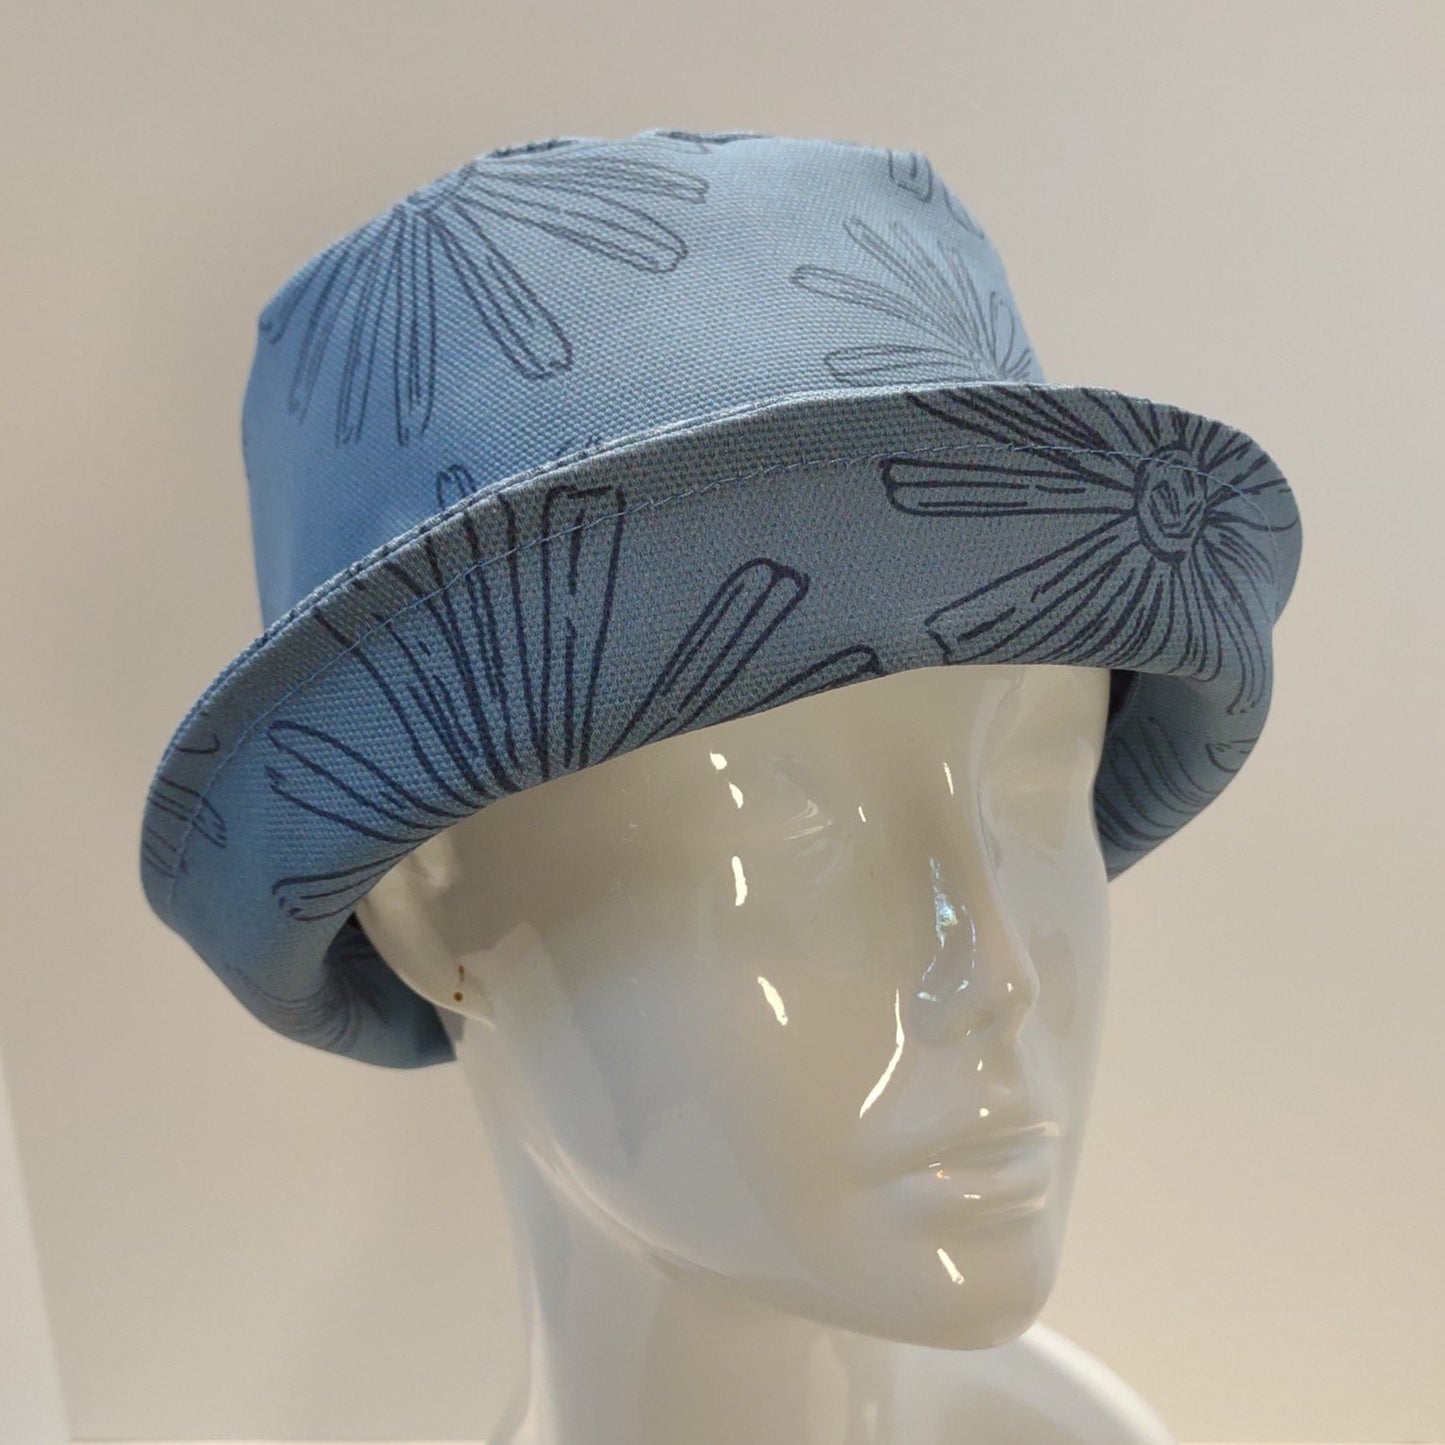 Breezy: Hand-Sketched Flowers Cuffed Hat